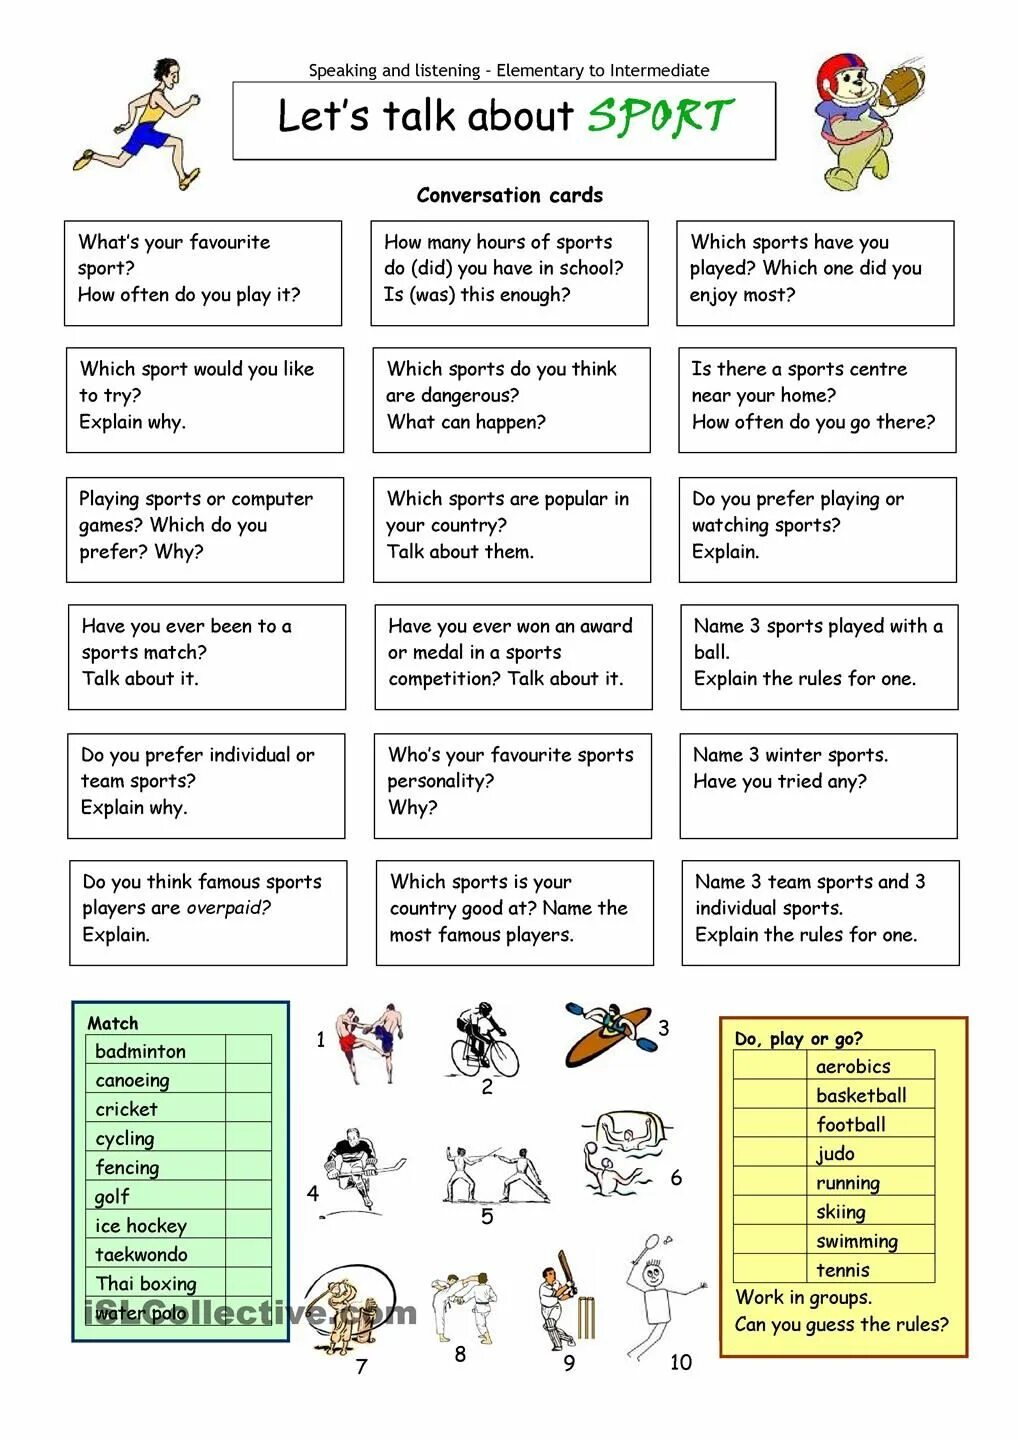 Английский speaking Worksheet. Карточки для speaking. Lets talk about Sport. Спорт английский Worksheet. Talk about your favorite